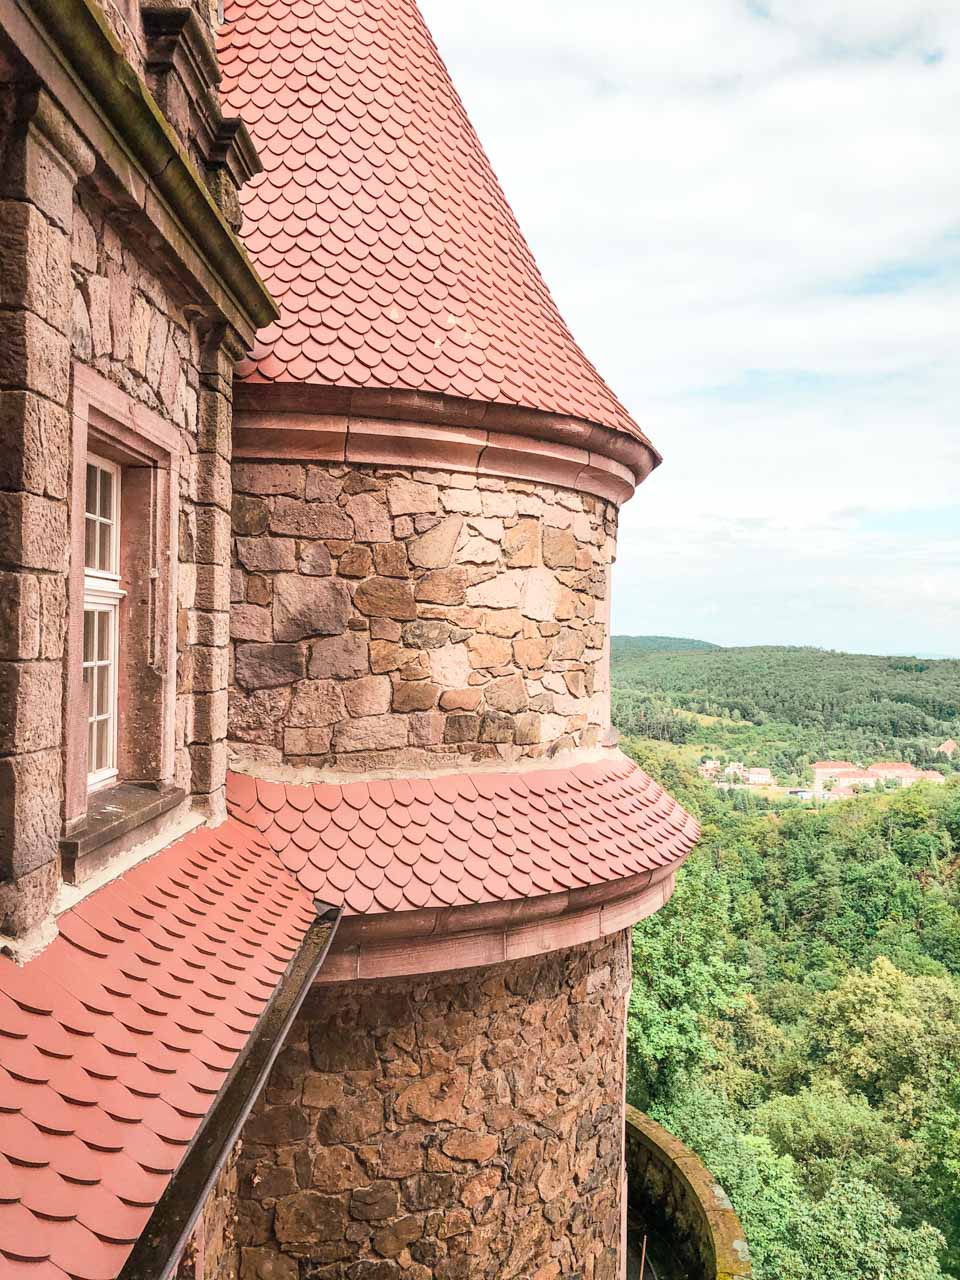 A close-up shot of a tower of Książ Castle seen from one of the rooms